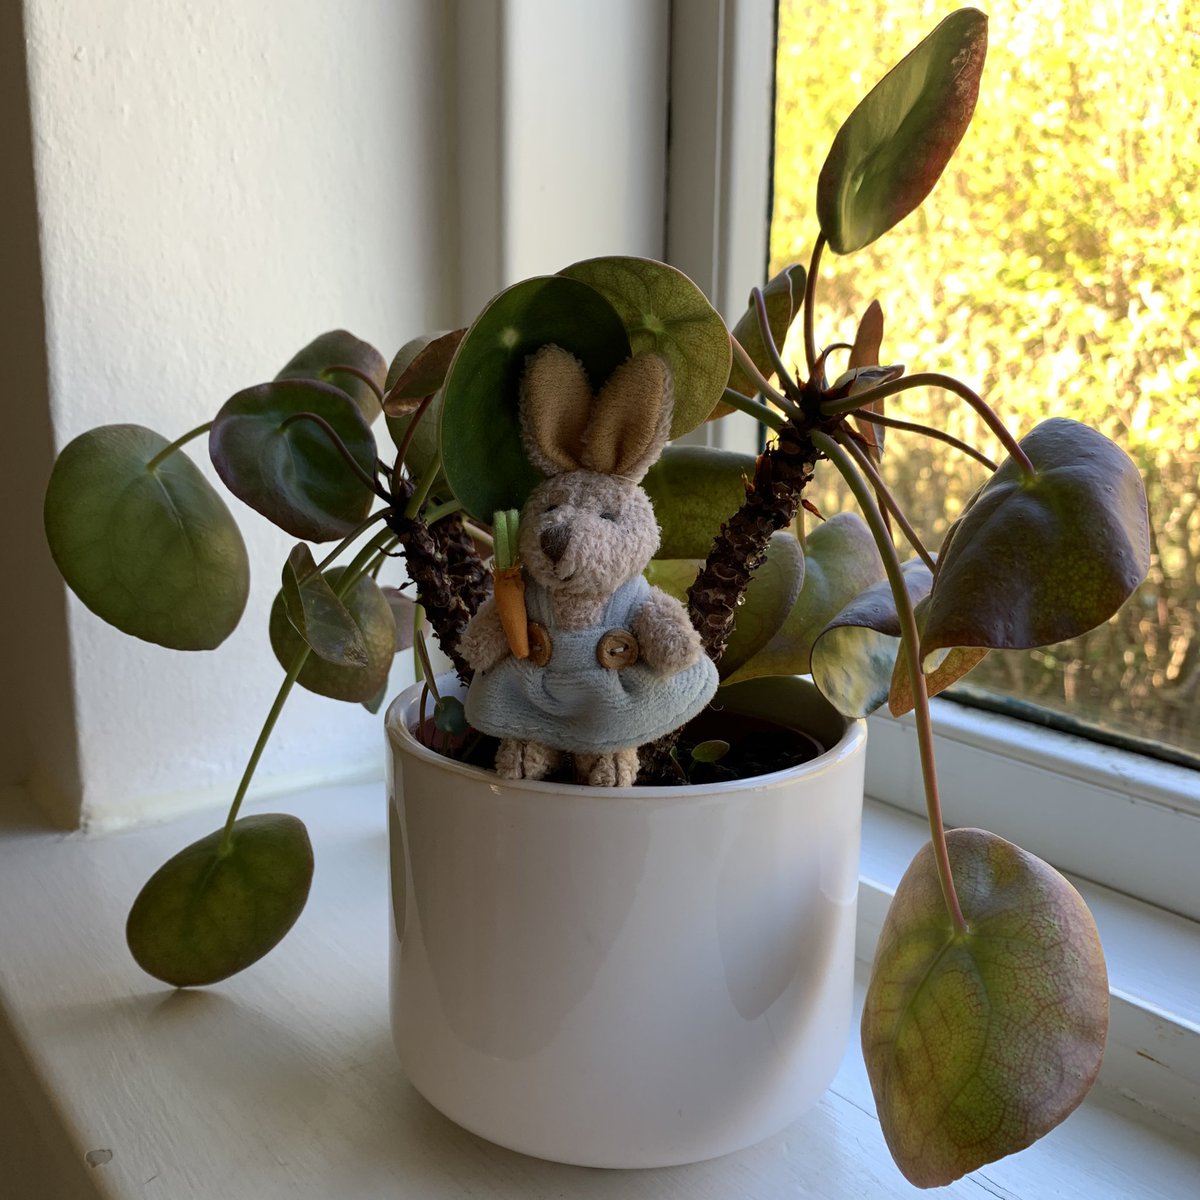 Final plant and you’re all off the hook: a Chinese money plant with an easter bunny my granma gave to me more than 10yrs ago wow I really am extremely sentimental huh?